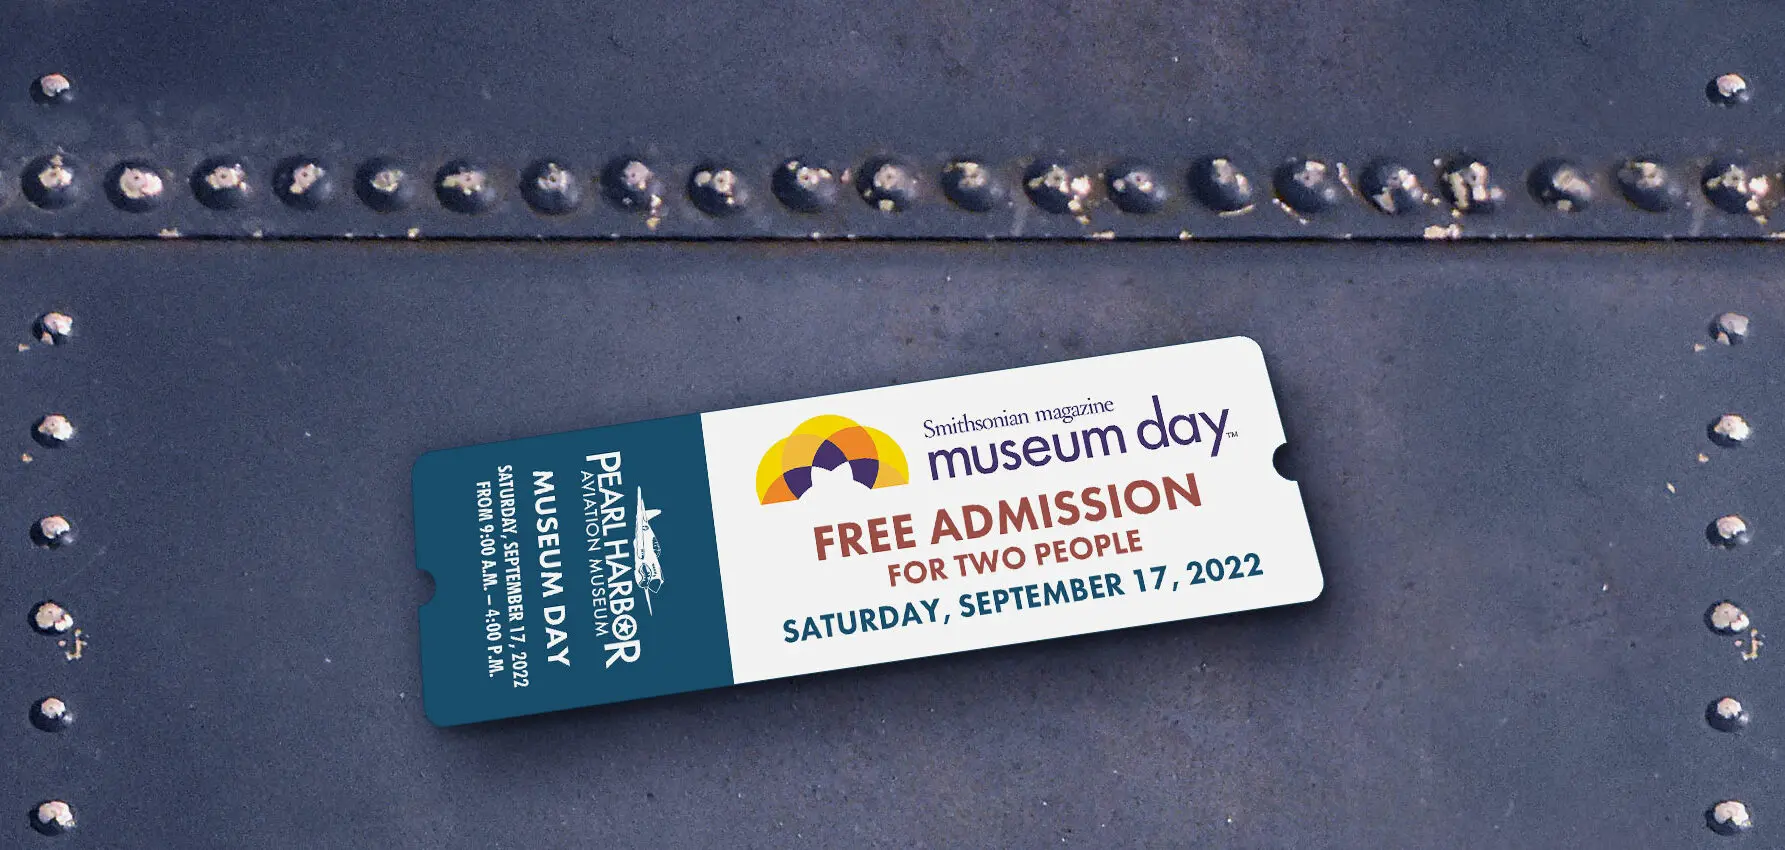 Photograph of Museum Day banner photoshopped to look like a ticket.